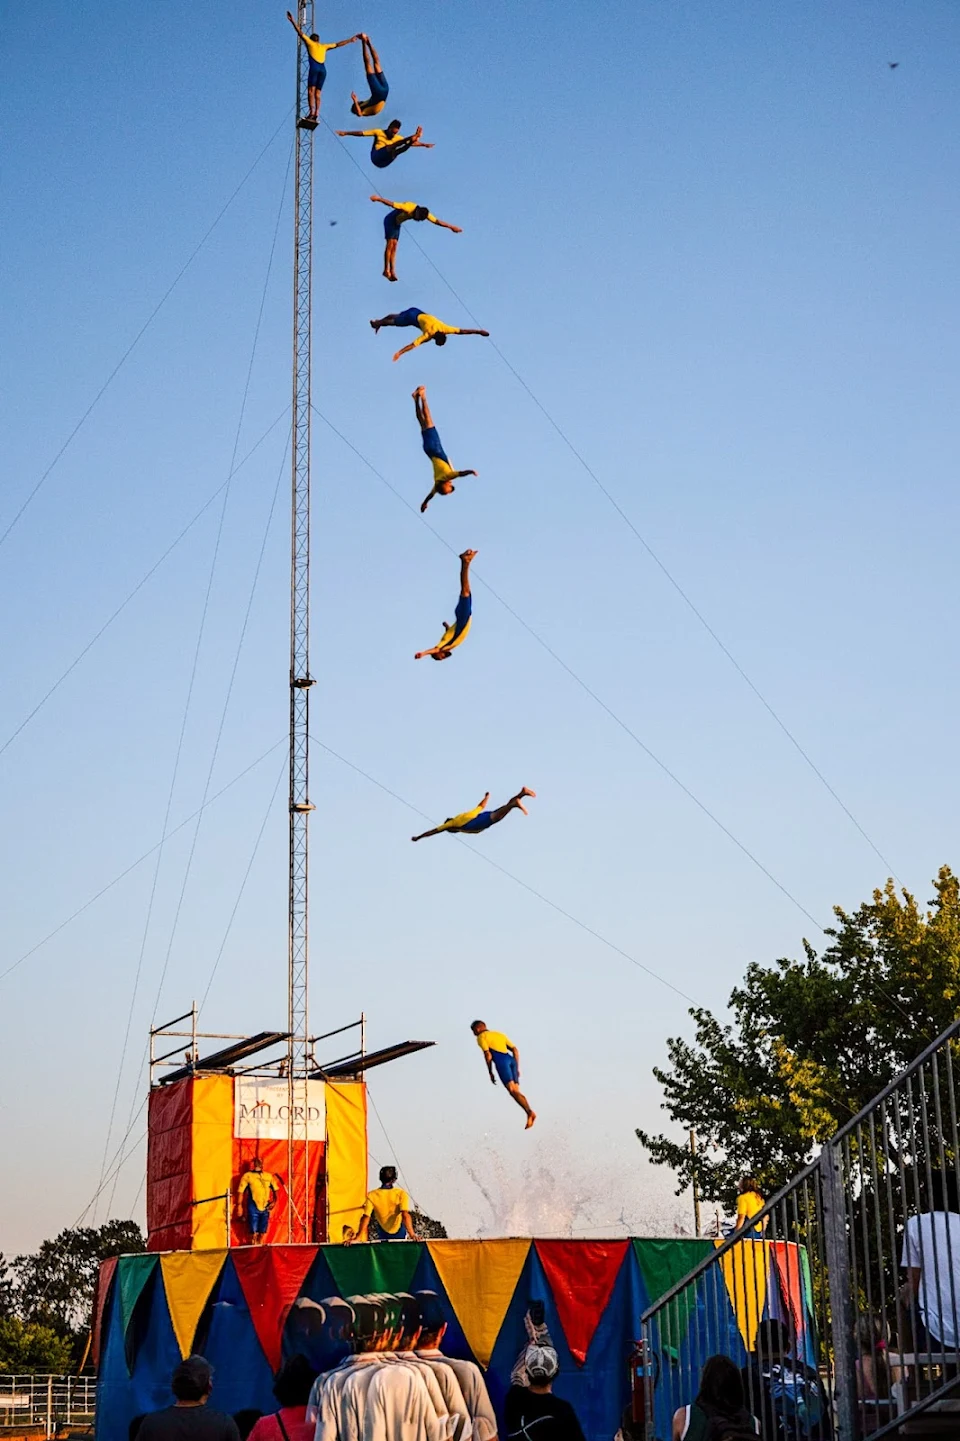 80foot/25 meter high dive at the county fair